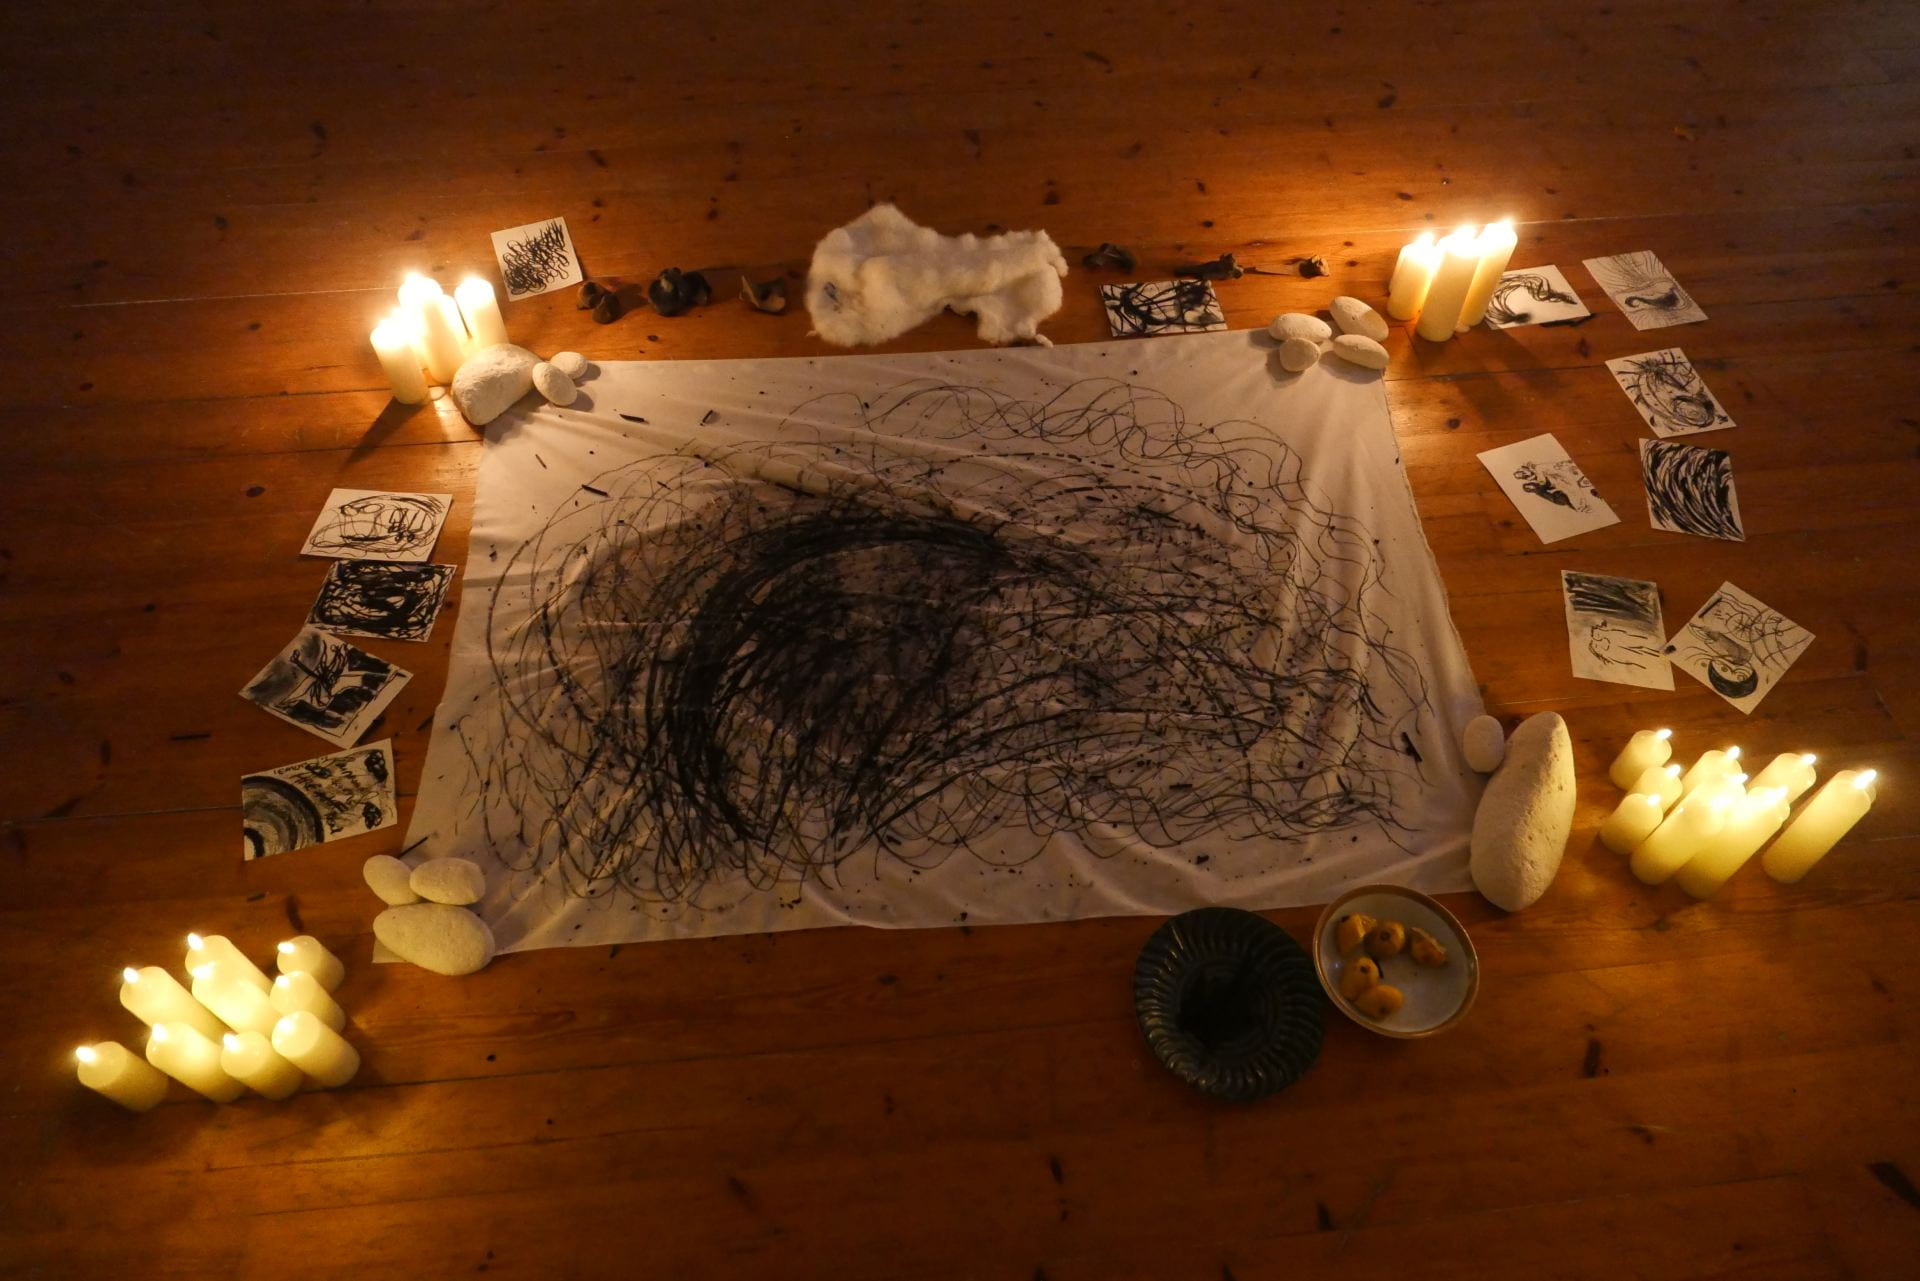 An image of a scribbled drawing on white fabric, surrounded by smaller drawings and candles on a wooden floor.